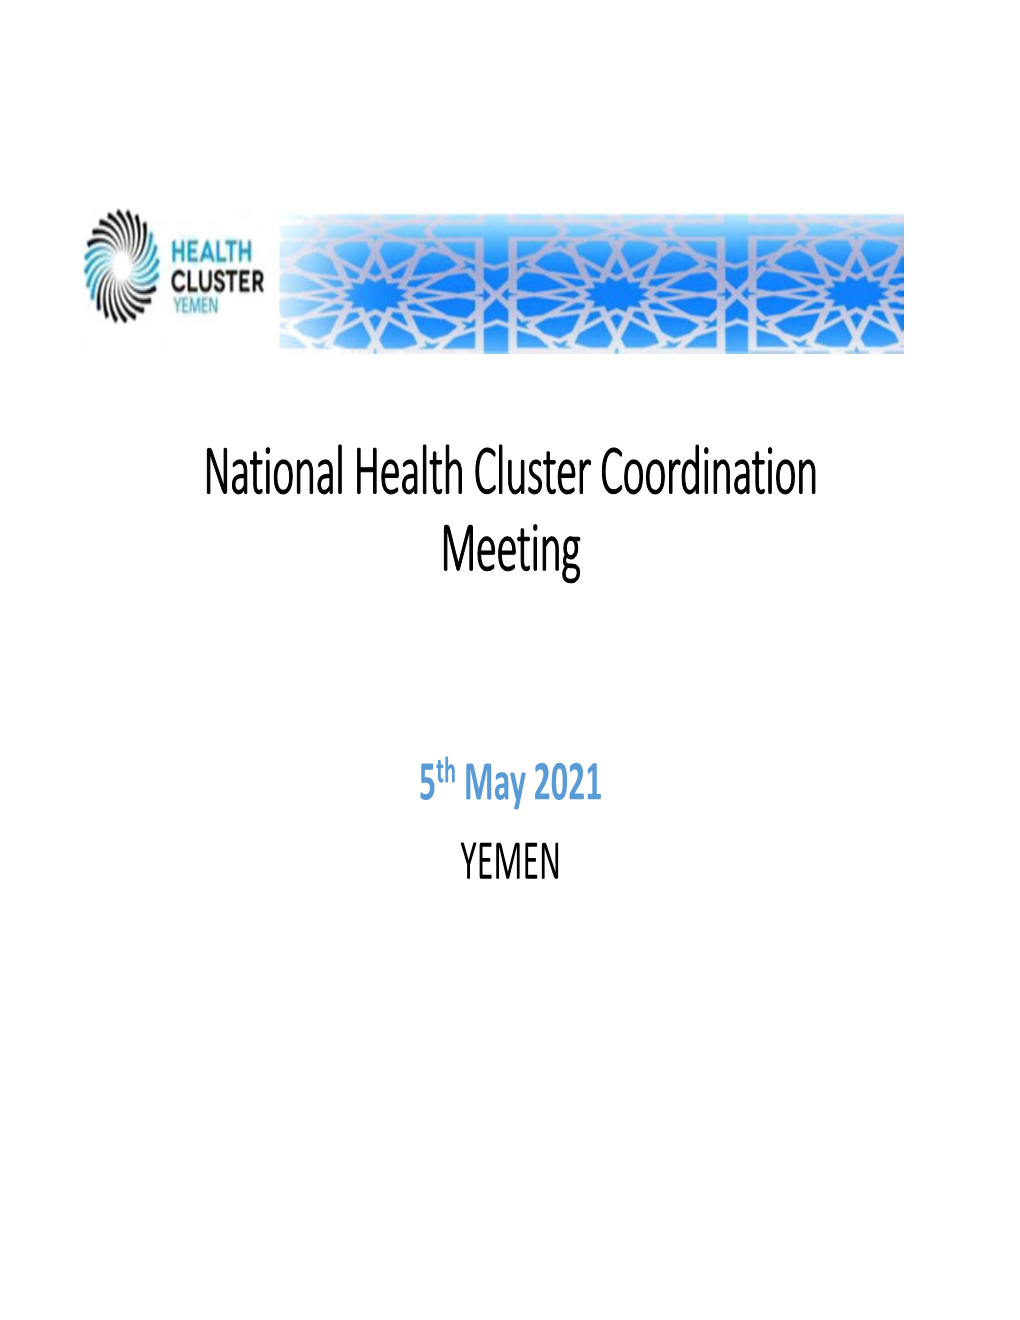 National Health Cluster Coordination Meeting